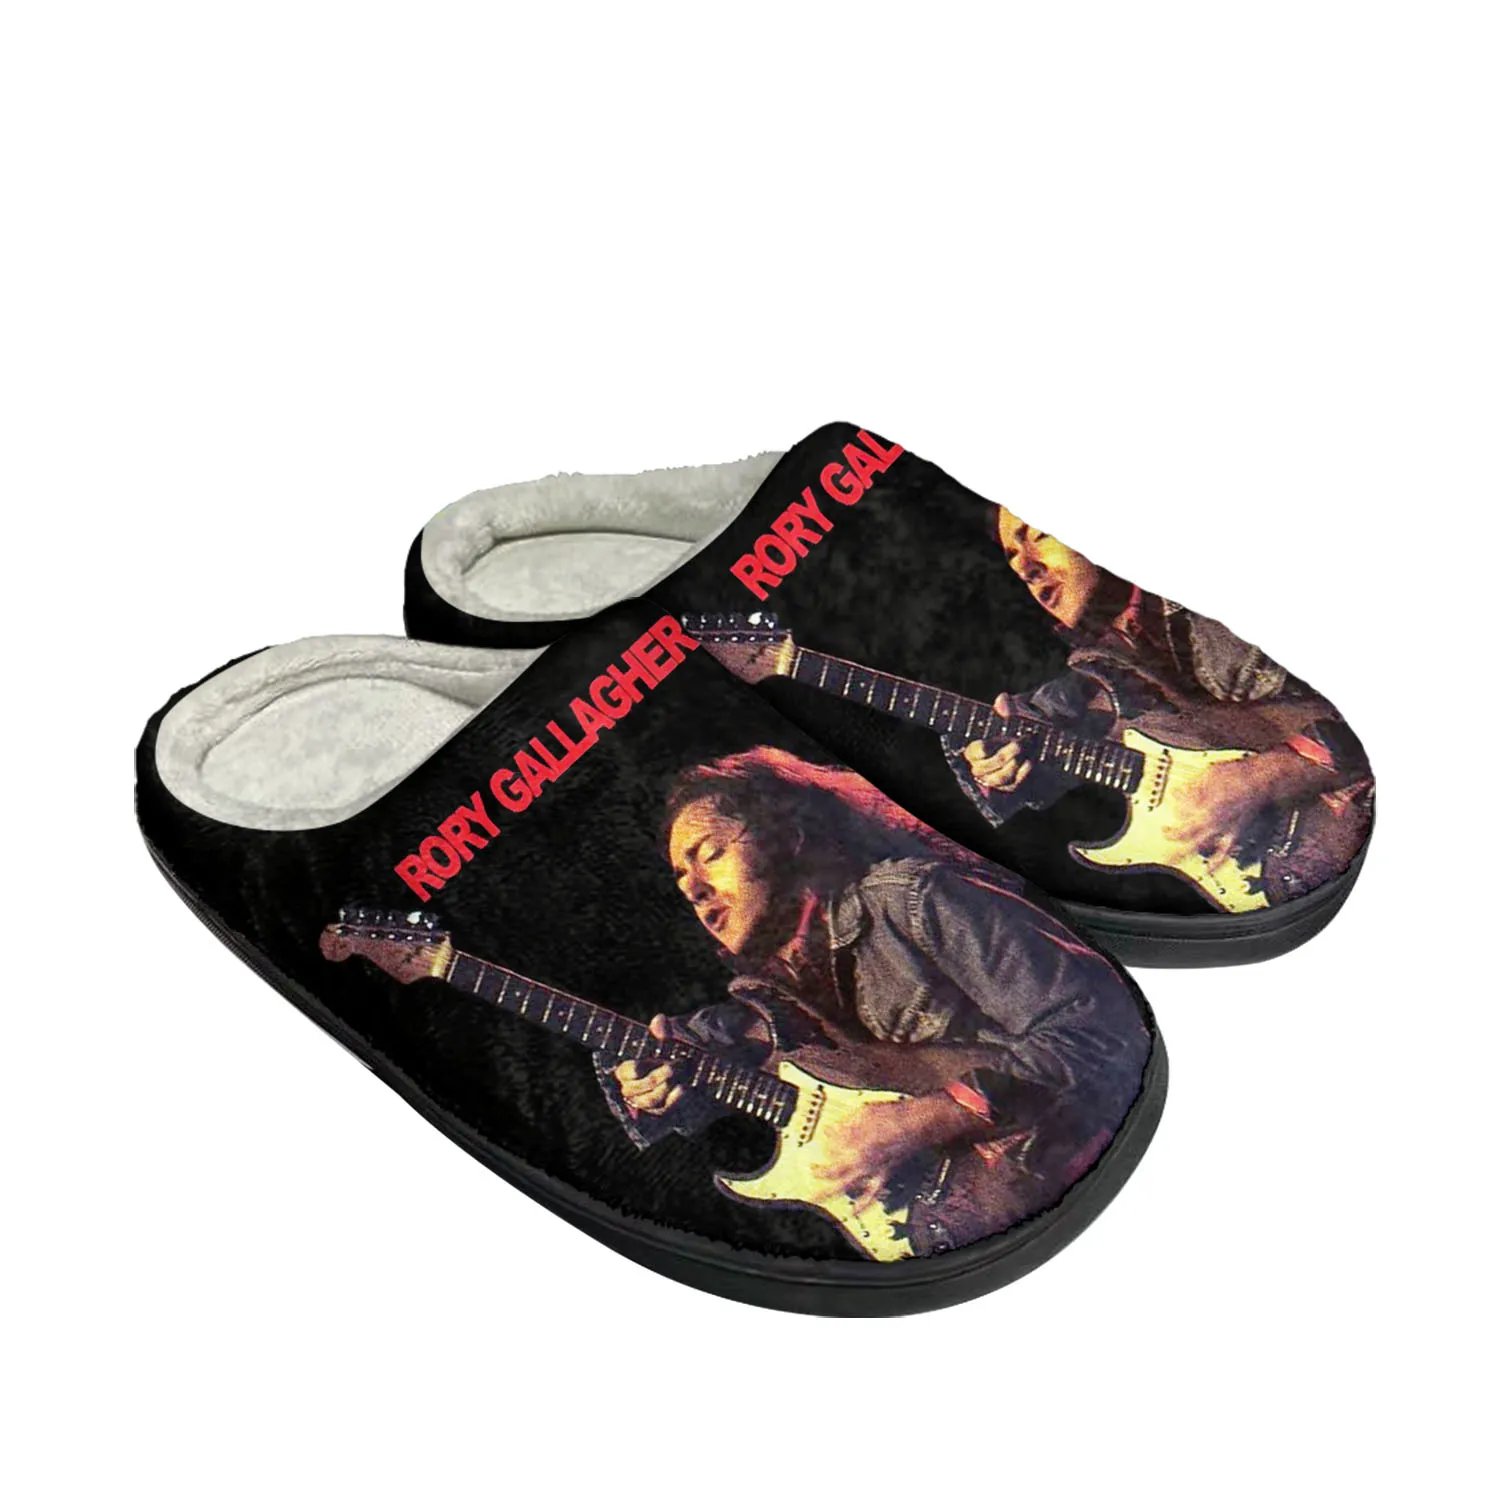 

Rory Gallagher Music Pop Home Cotton Custom Slippers Mens Womens Sandals Plush Bedroom Casual Keep Warm Shoes Thermal Slipper